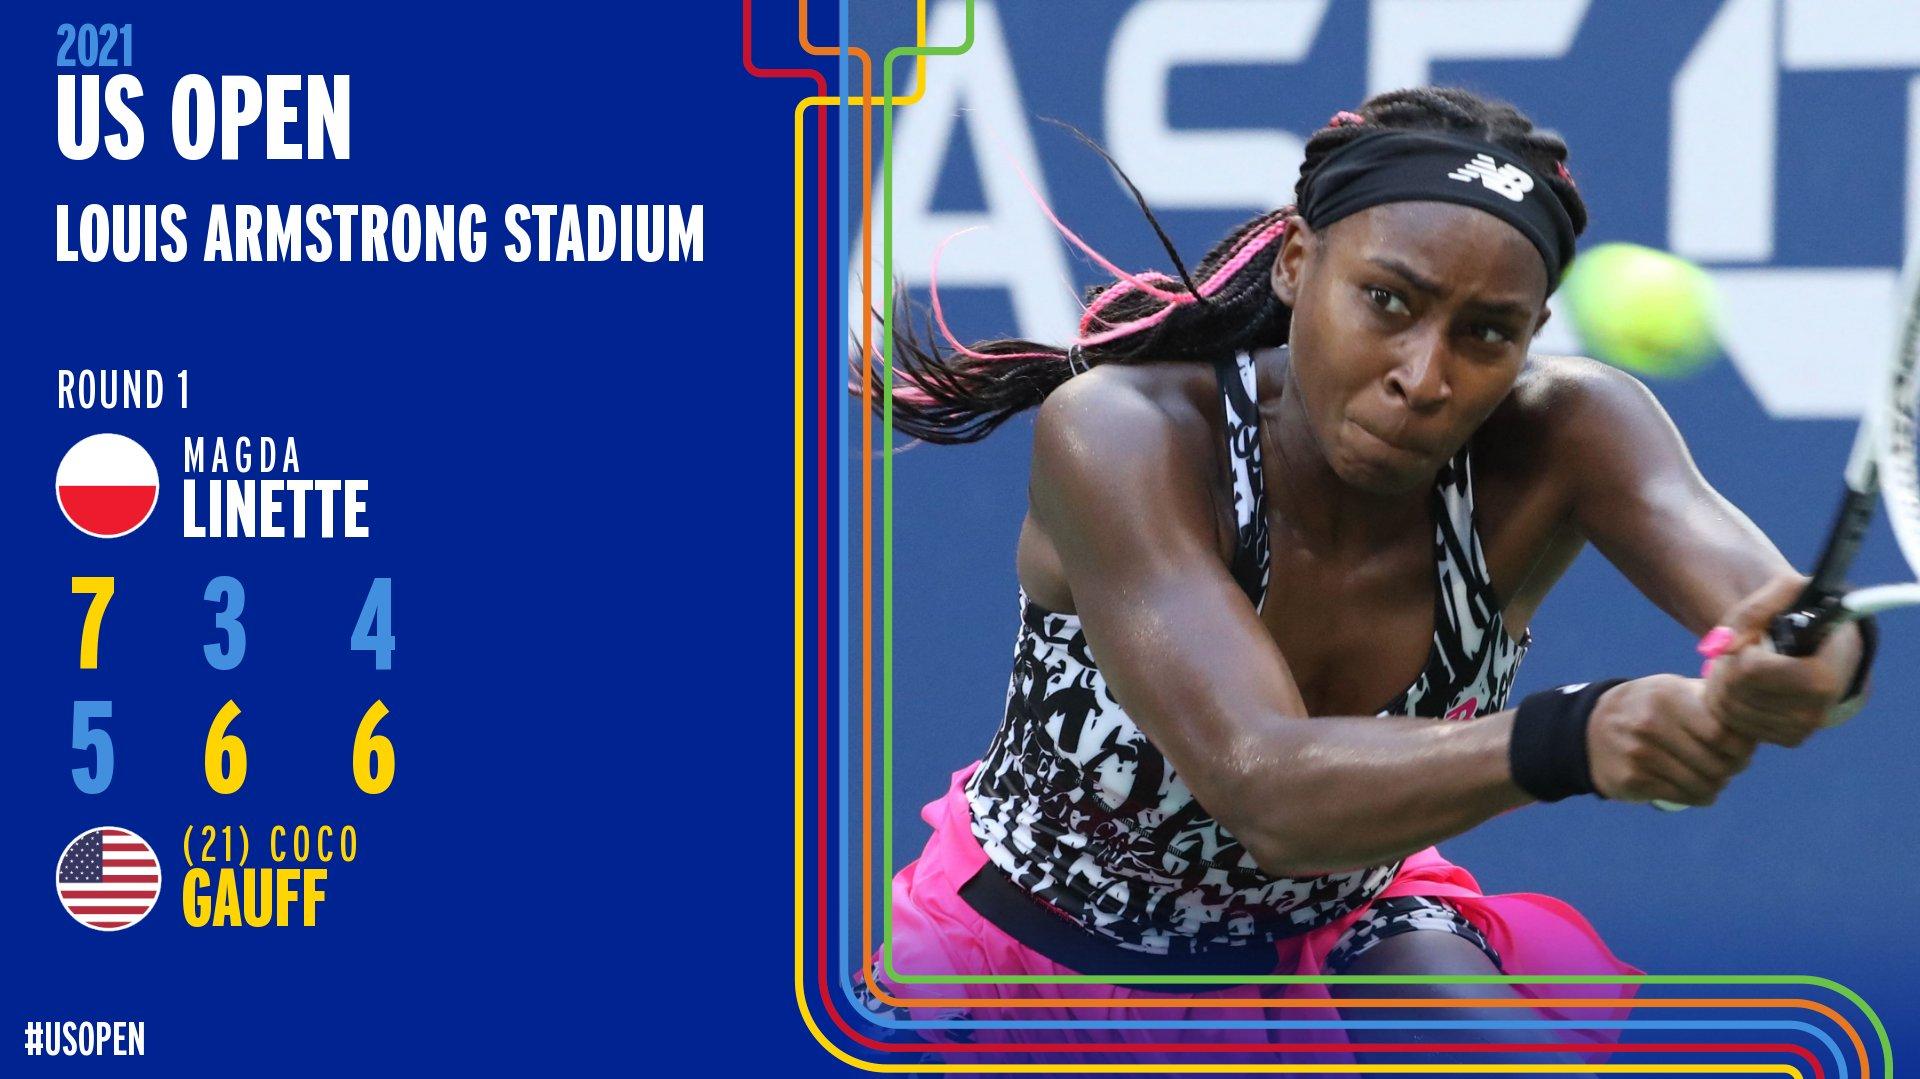 US Open Tennis on X Coco Gauff is back to her winning ways in